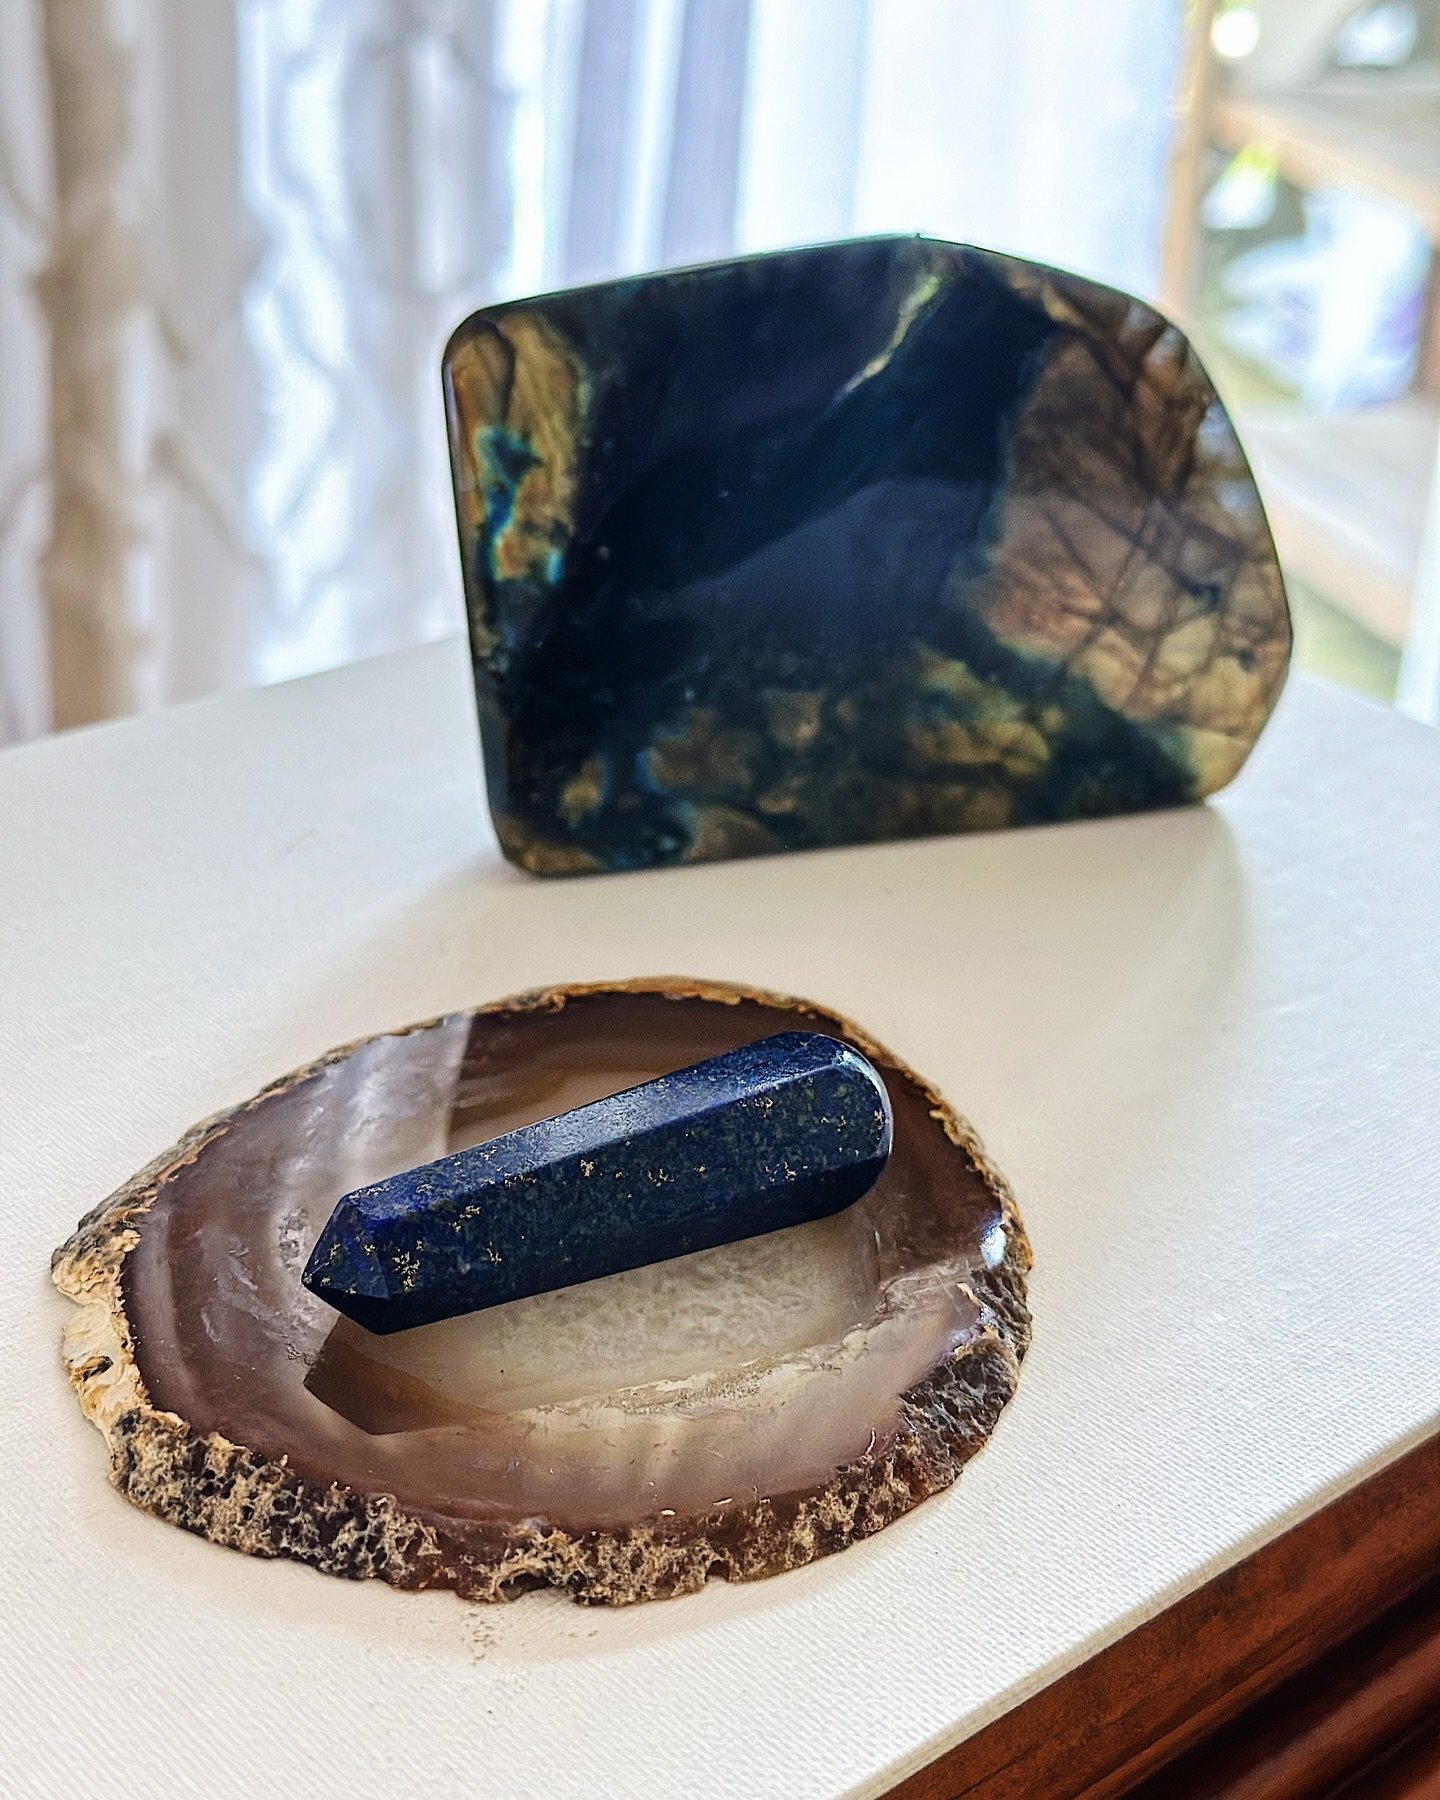 Writing about ancient Egyptian crystal magic today, these are my two allies:

Lapis lazuli - awakening, ancient memory, awareness
Labradorite - the magician&rsquo;s stone, activating inner magic

Channeling the teachings of old knowledge and lost rea